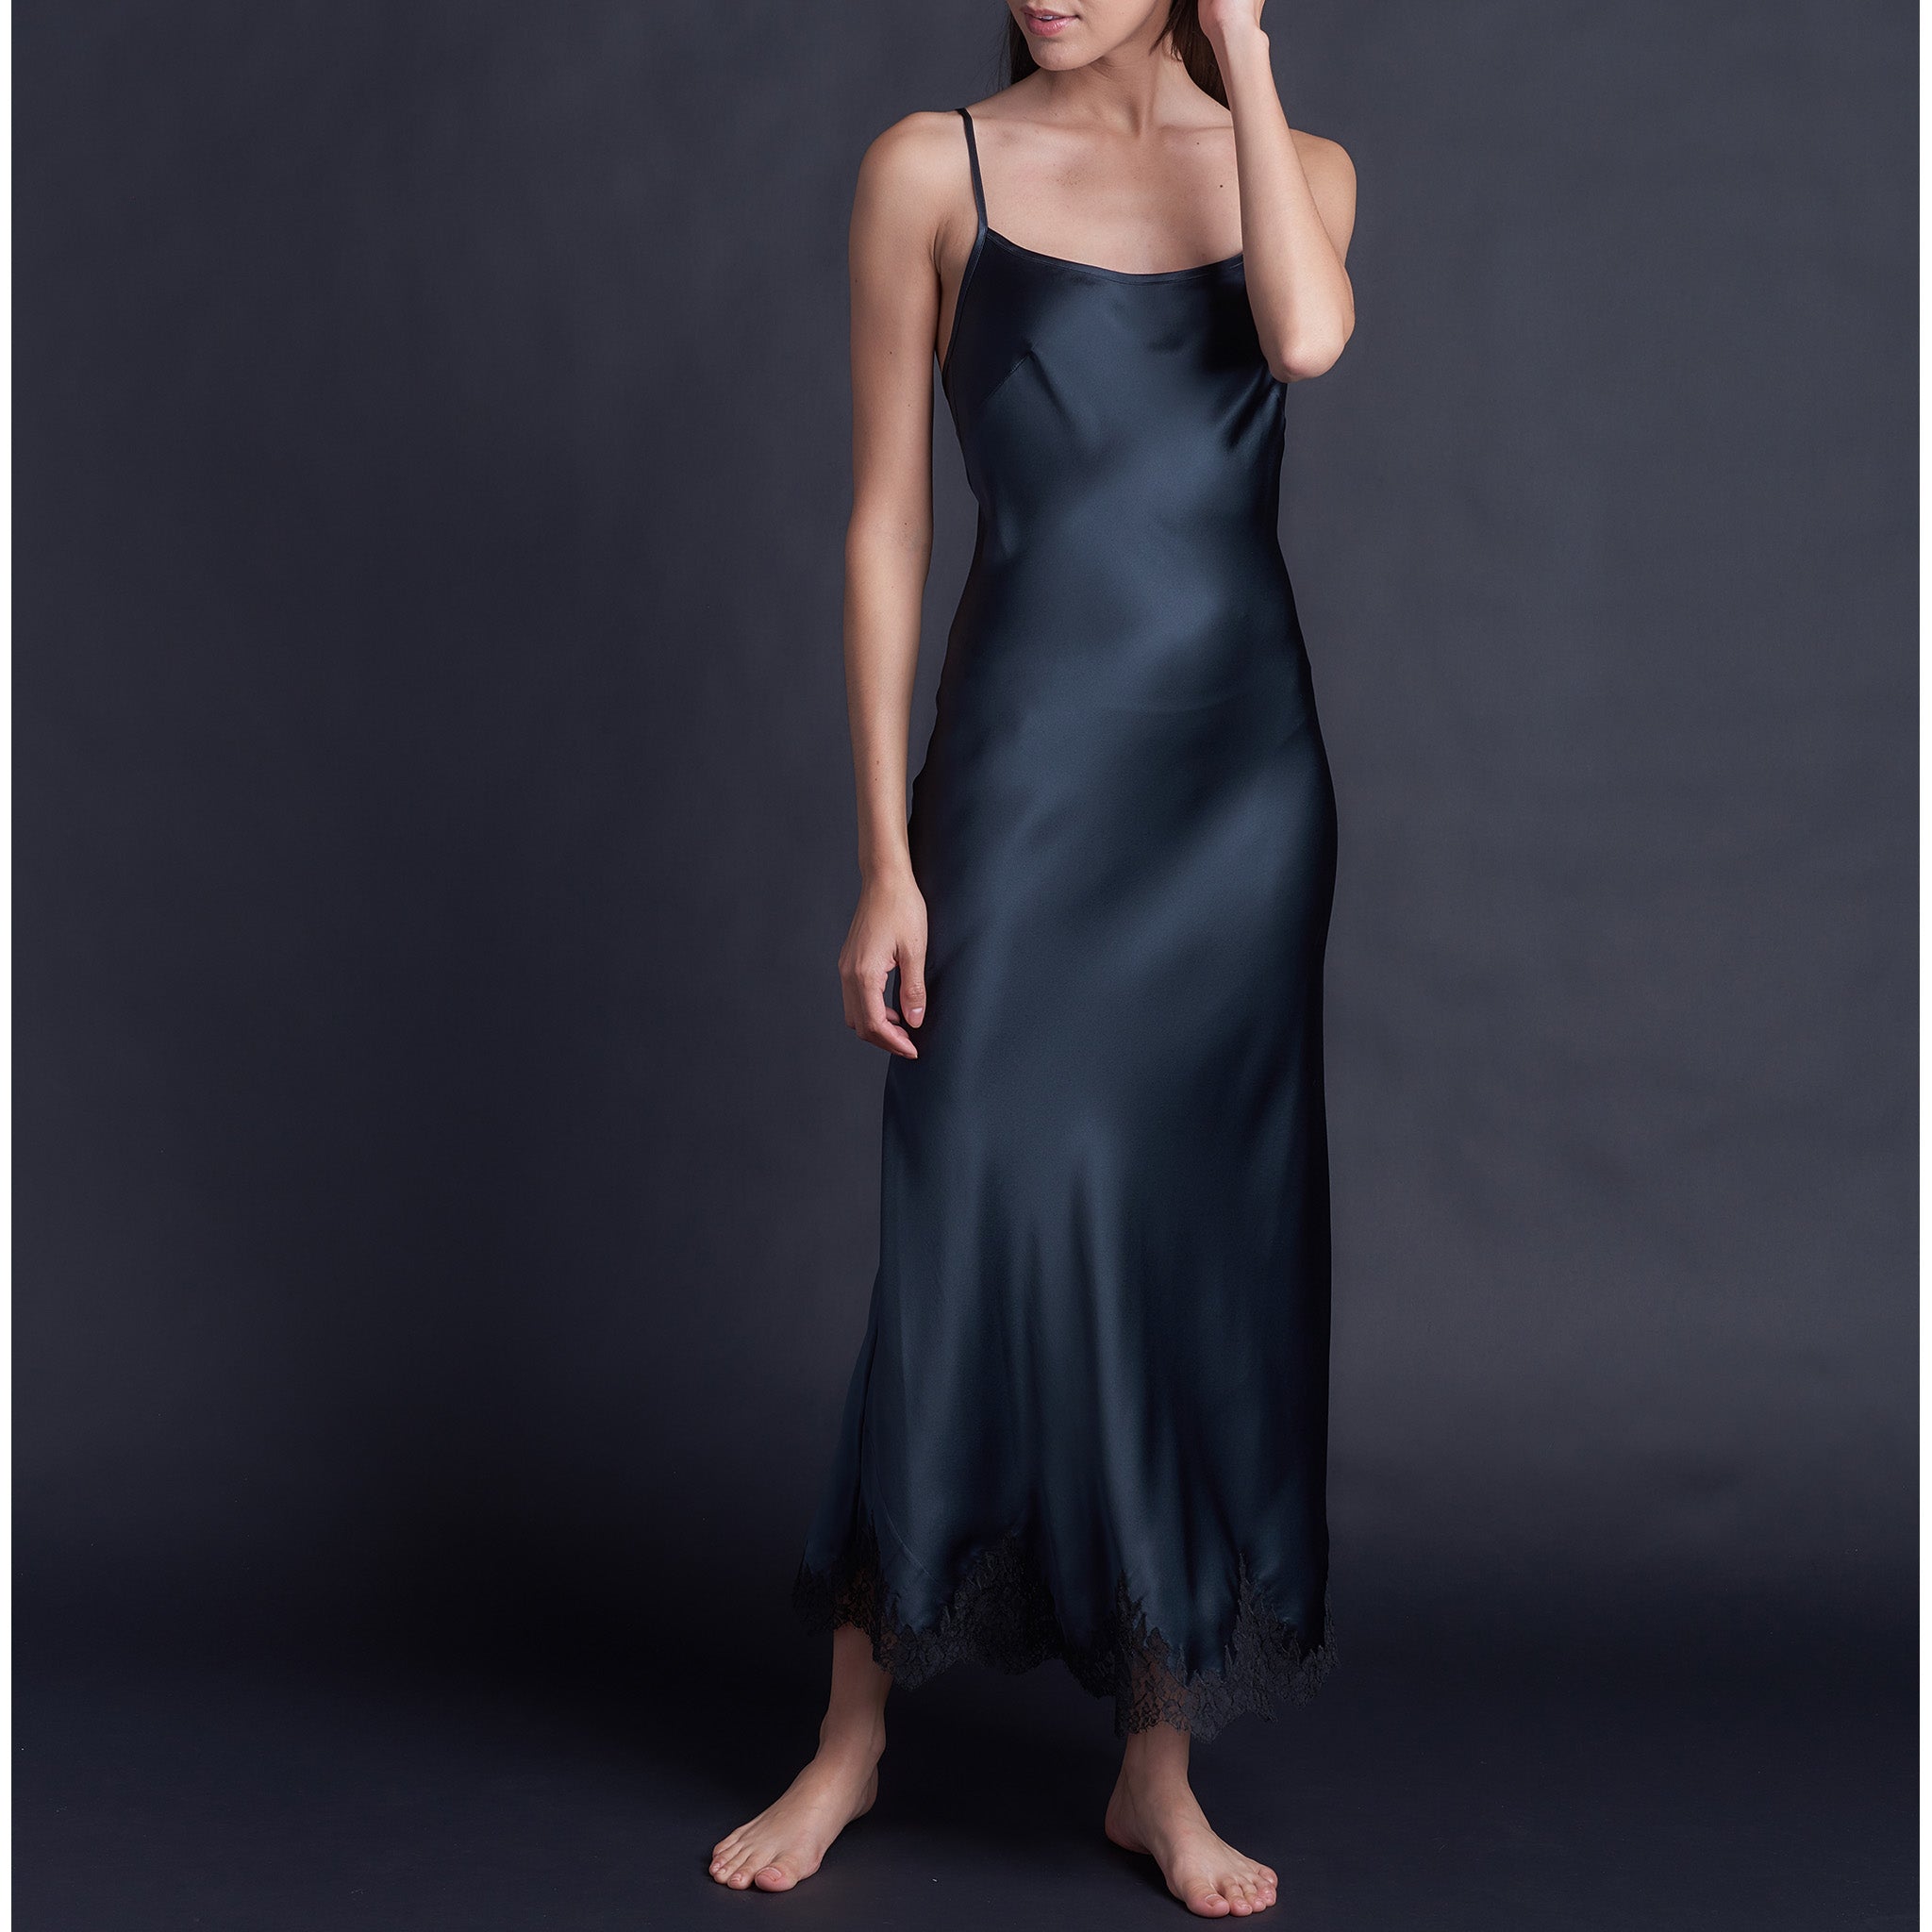 Juno Slip Dress in Sapphire Silk Charmeuse with Lace